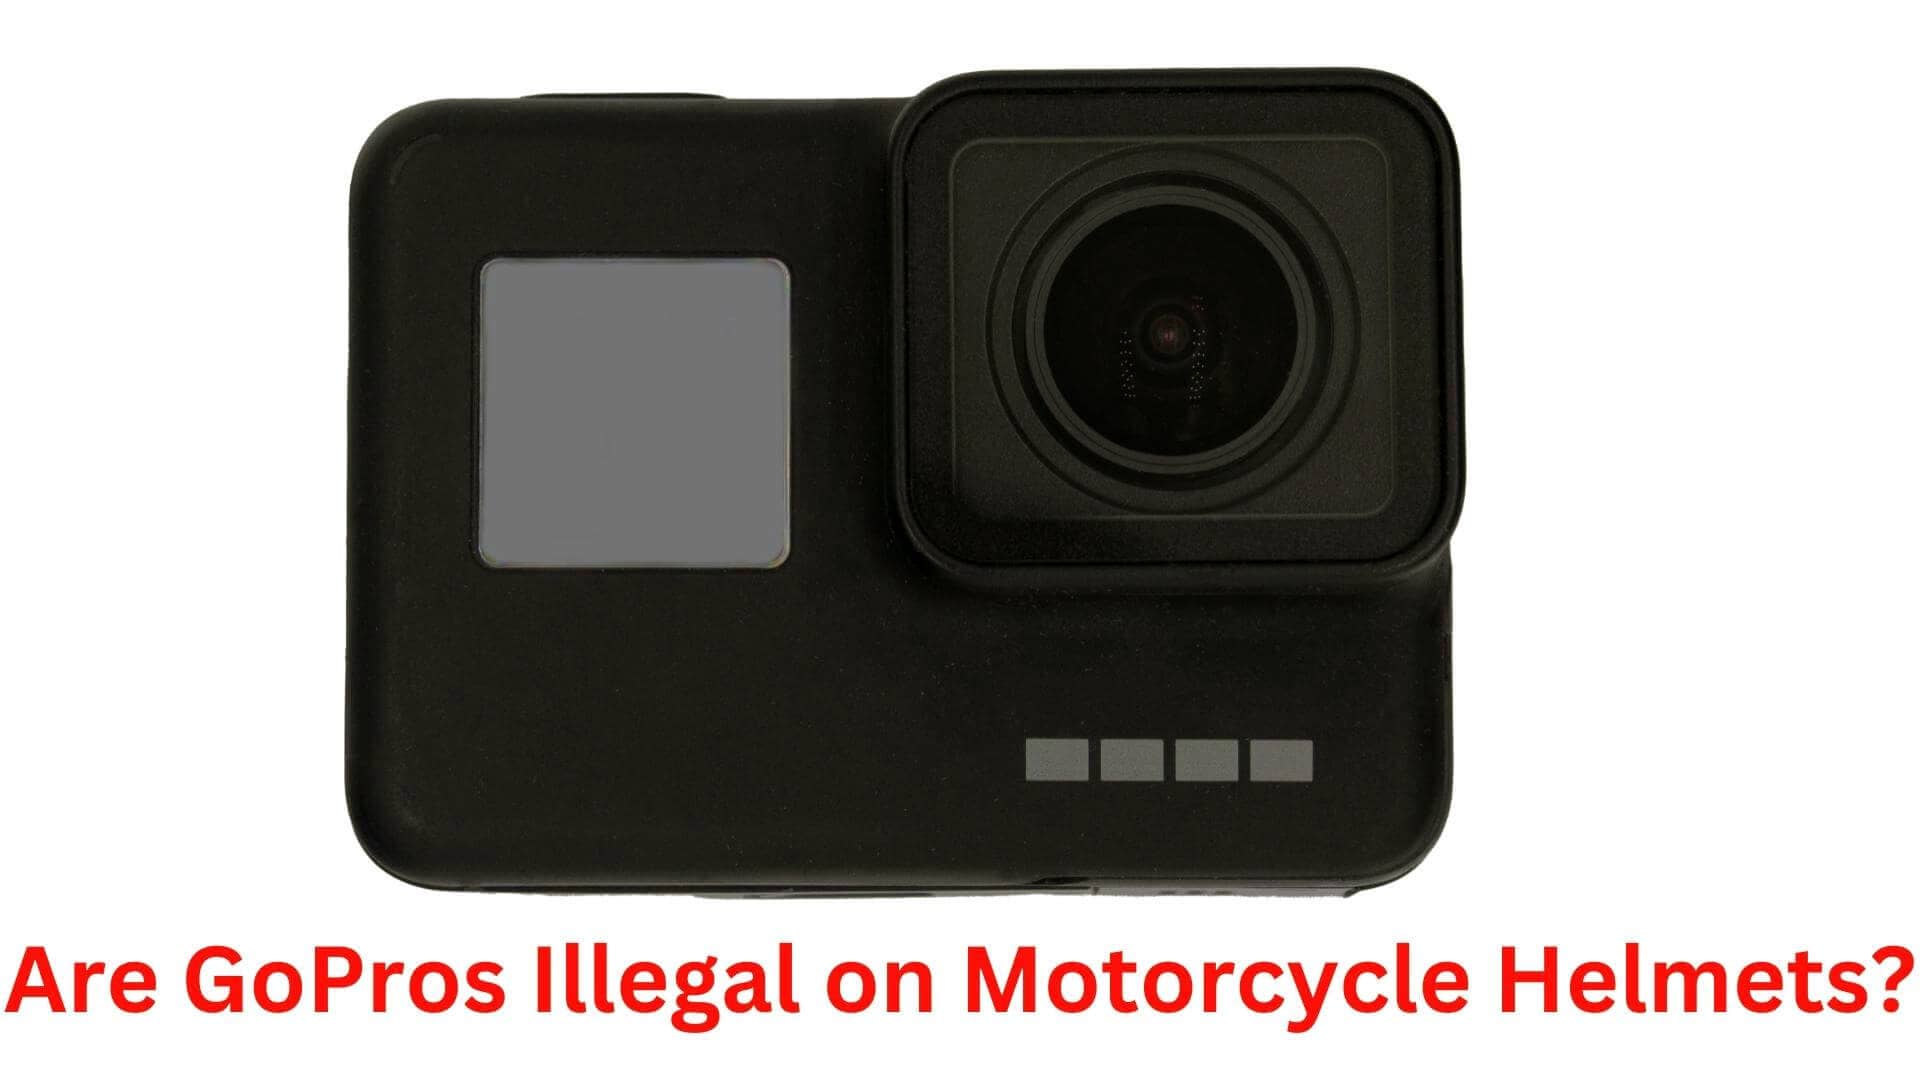 Are GoPros Illegal on Motorcycle Helmets?